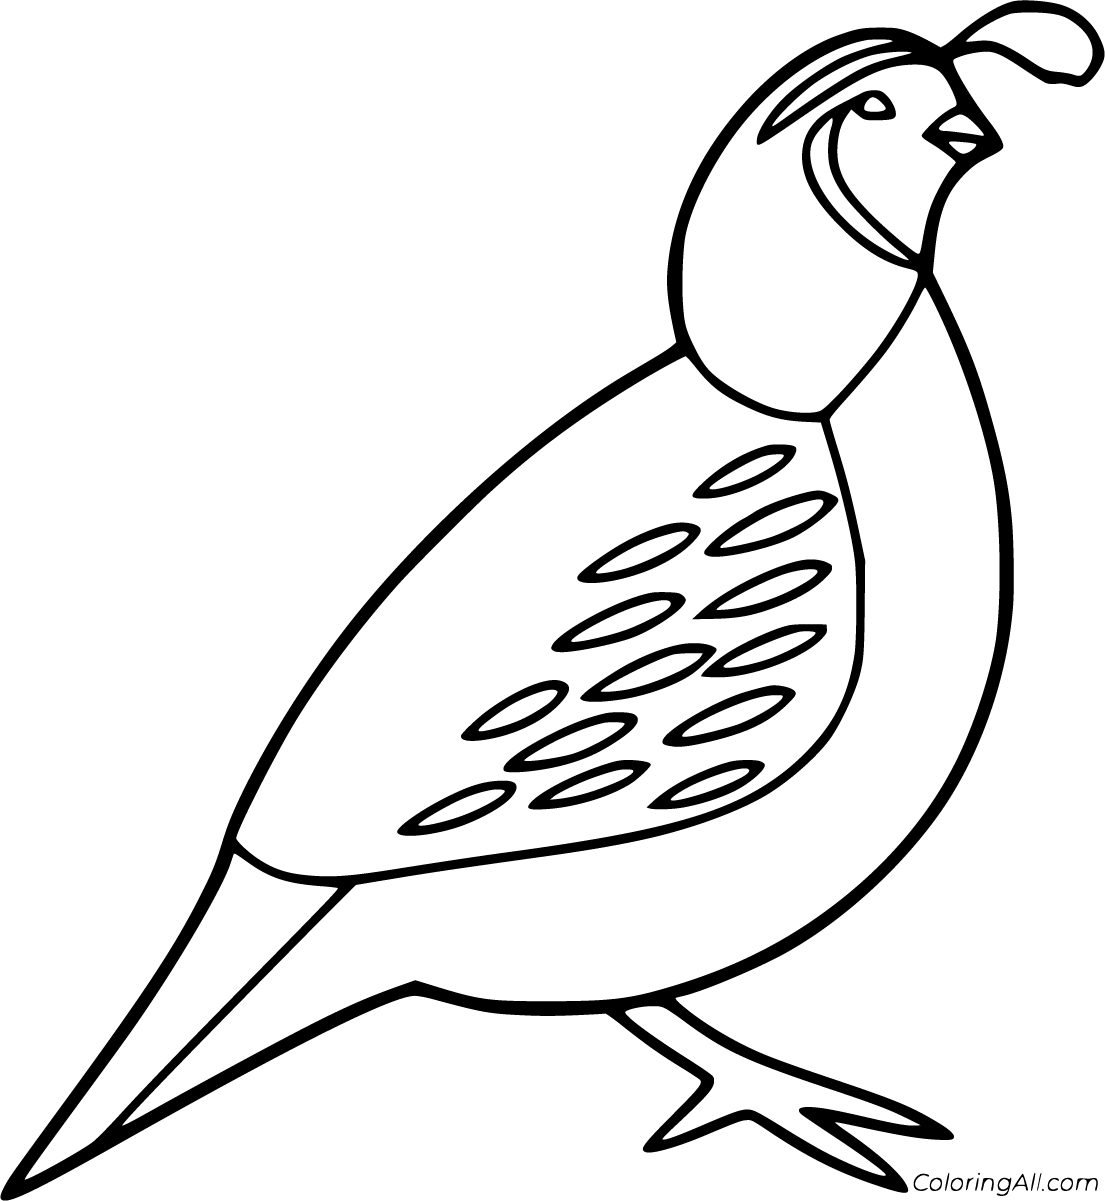 Quail coloring pages coloring pages bird coloring pages color